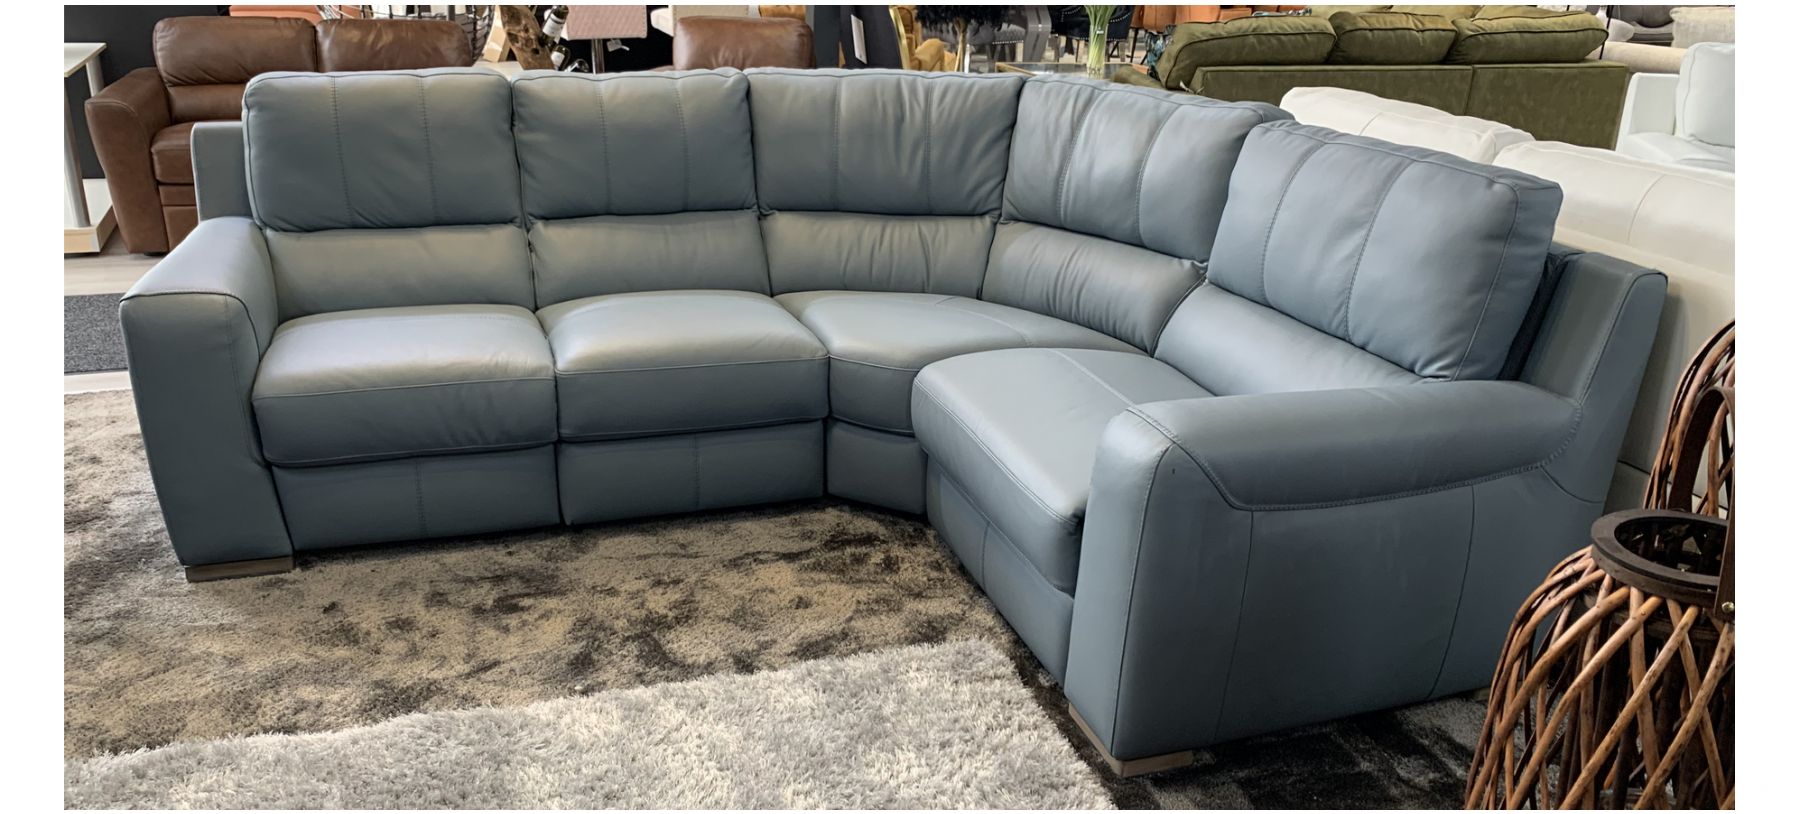 Lucca Blue RHF Double Electric Leather Corner Sofa Sisi Italia Semi-Aniline With Wooden Legs - Few Scuffs (see images) High Street Furniture Store Cancellation 49516 | Leather Sofa World